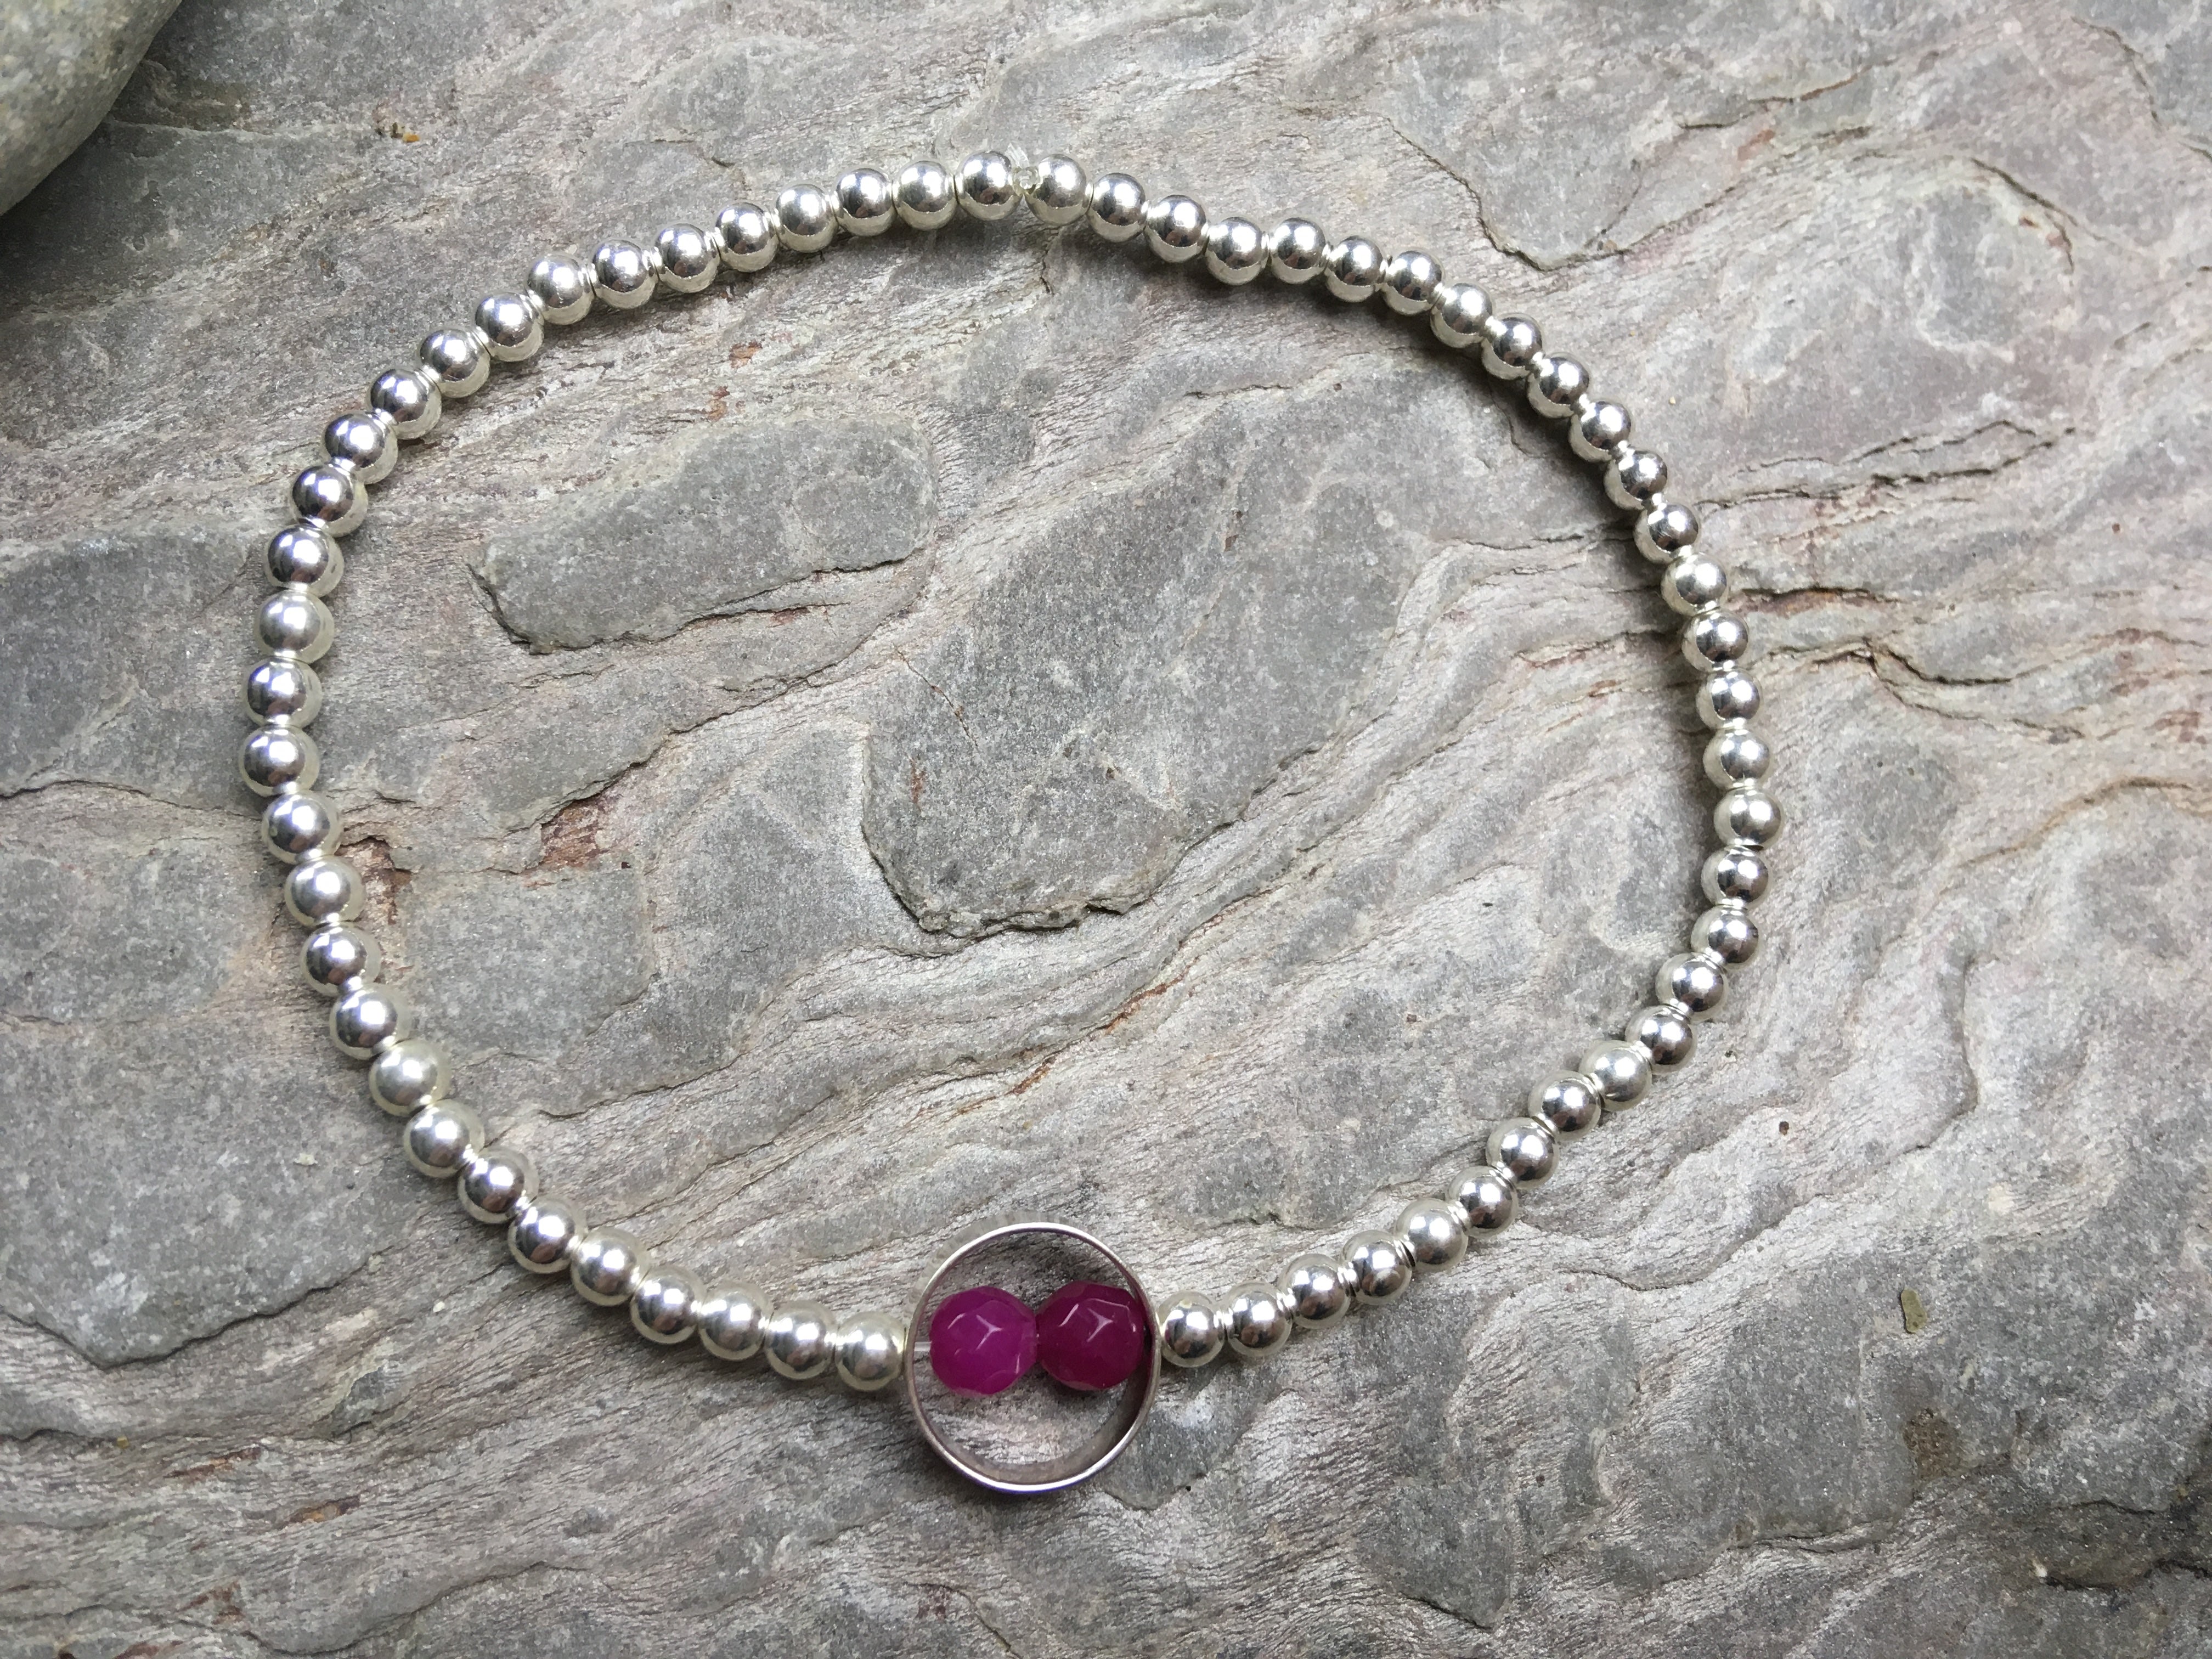 Silver beaded bracelet with double pink stone in ring.